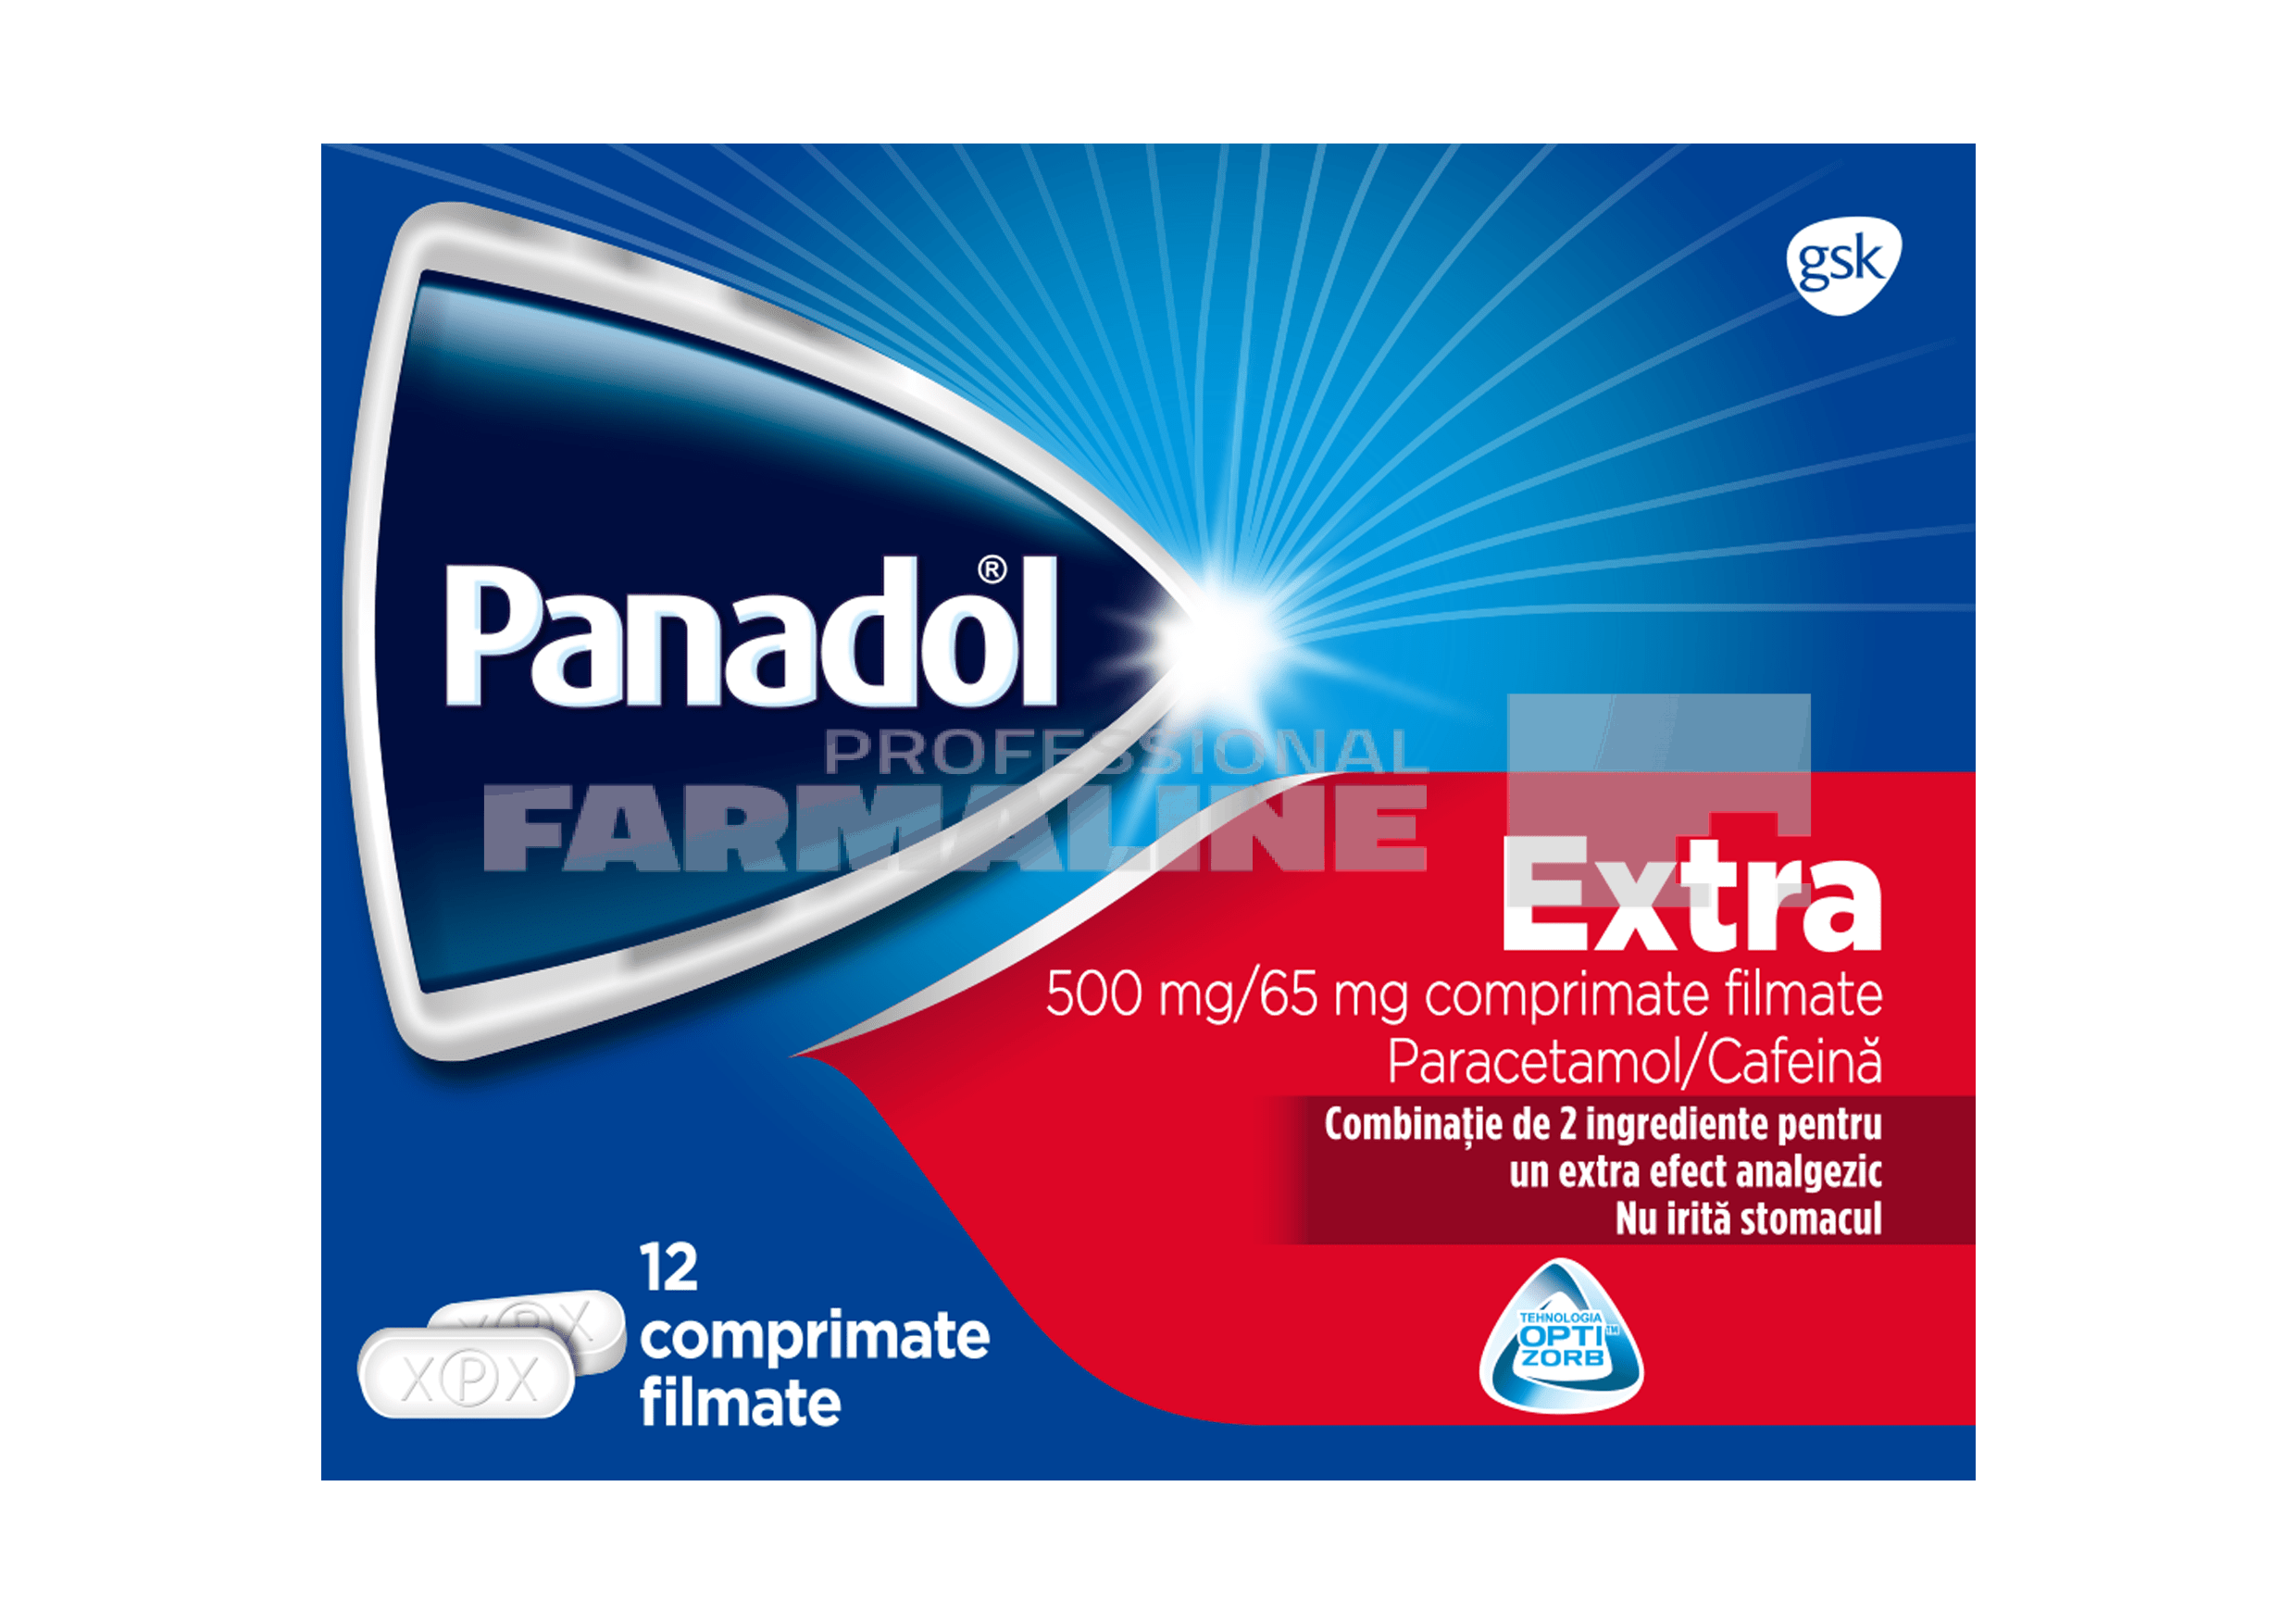 Panadol Extra 500 mg/65 mg 12 comprimate